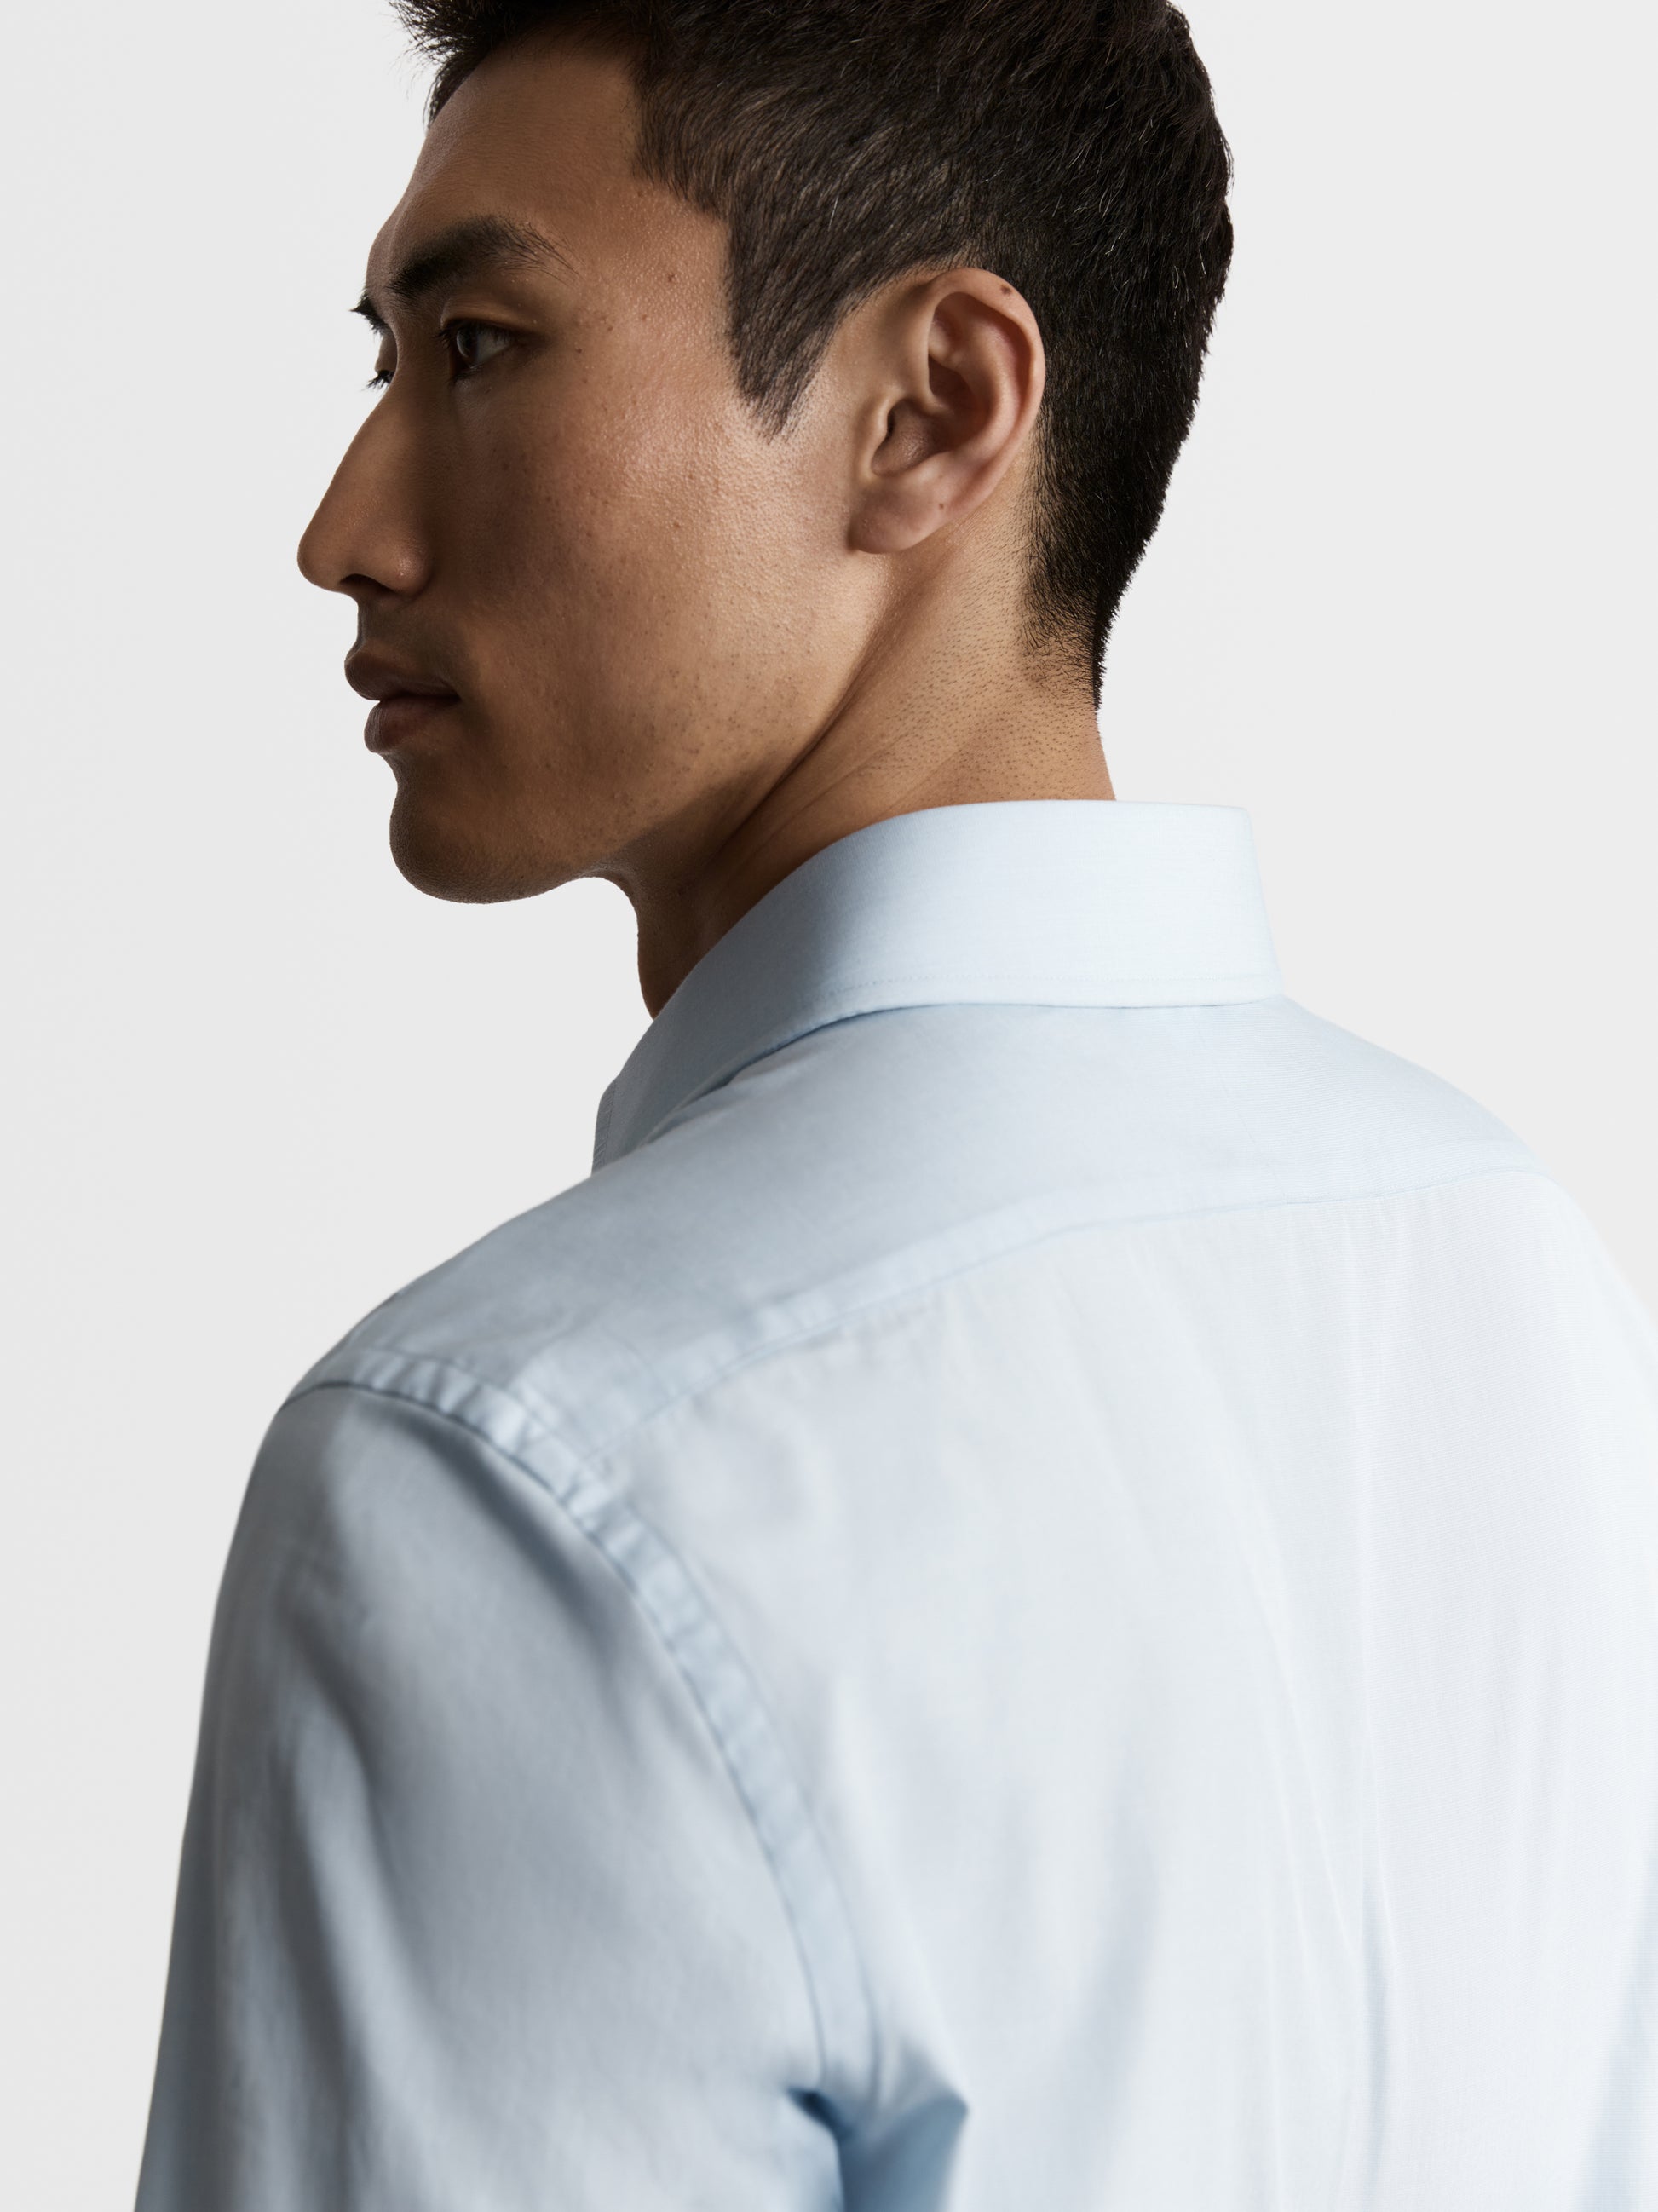 Image 3 of Light Blue End-on-End Fitted Single Cuff Classic Collar Shirt